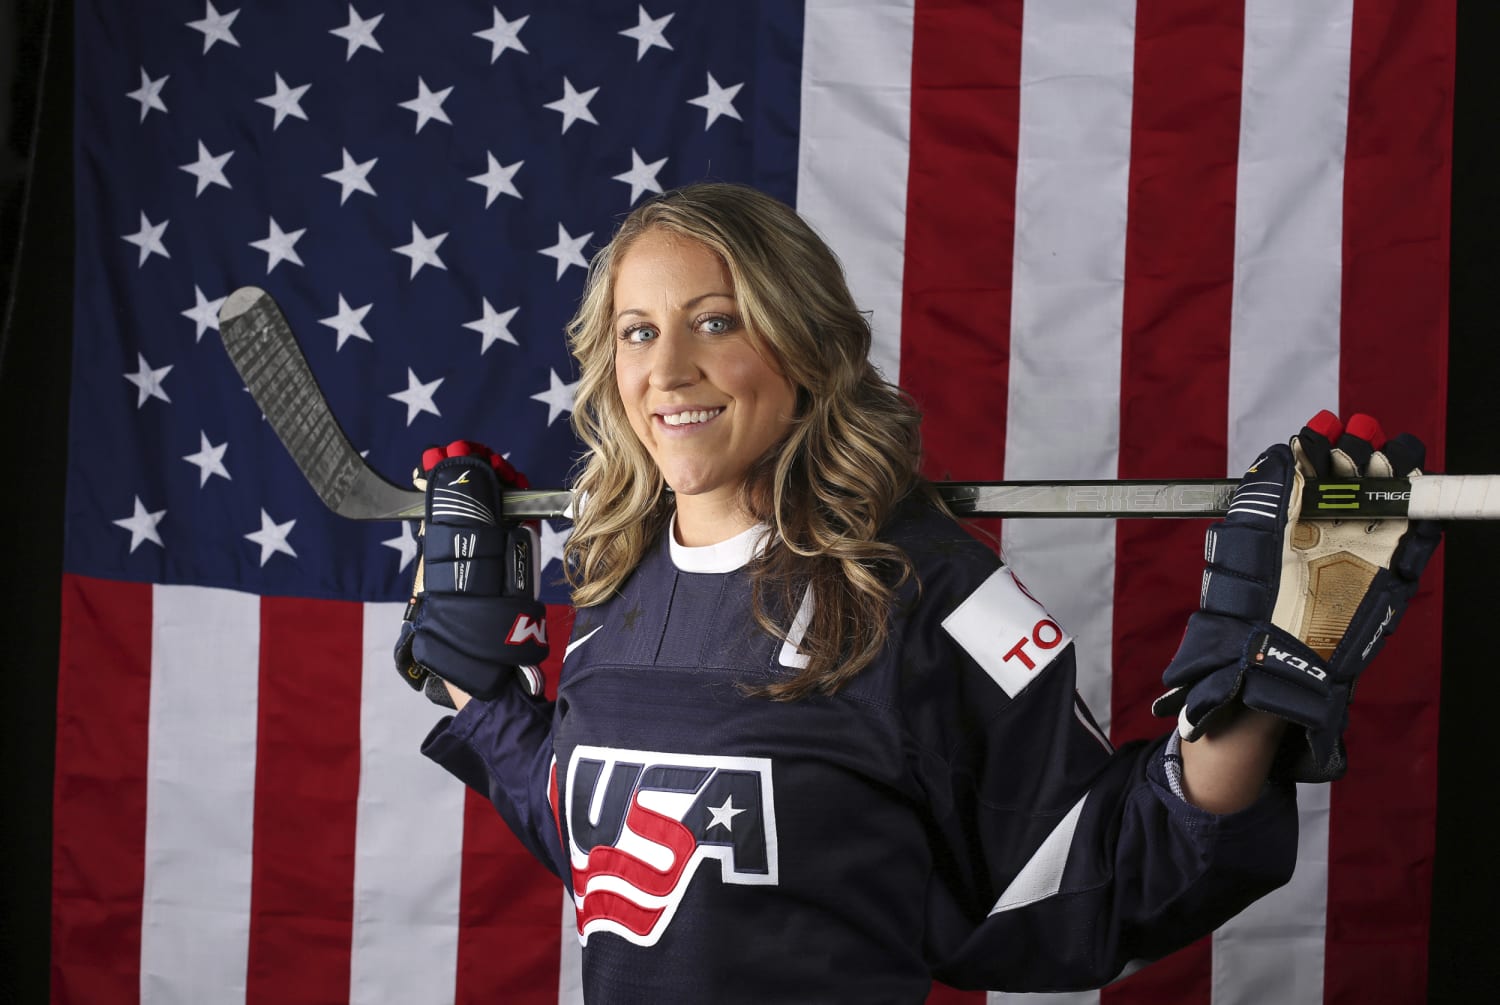 Safe to say there's a cast of characters in the US women's hockey